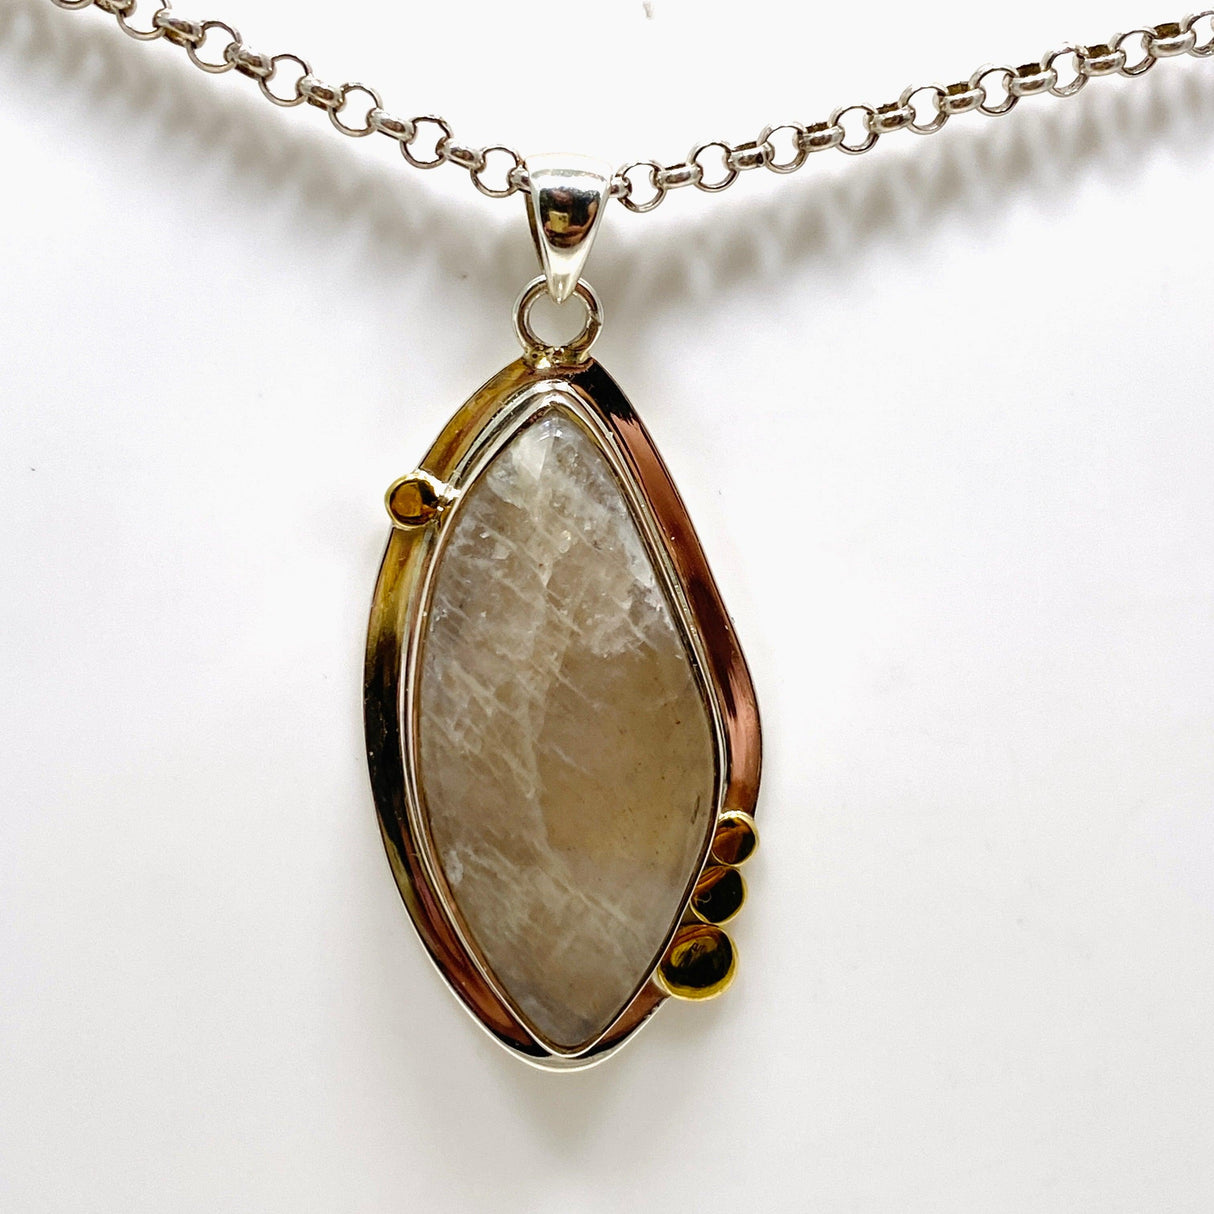 Belomorite (Sunstone with Moonstone "Eclipse" Stone) Freeform Pendant with brass accents KPGJ4235 - Nature's Magick